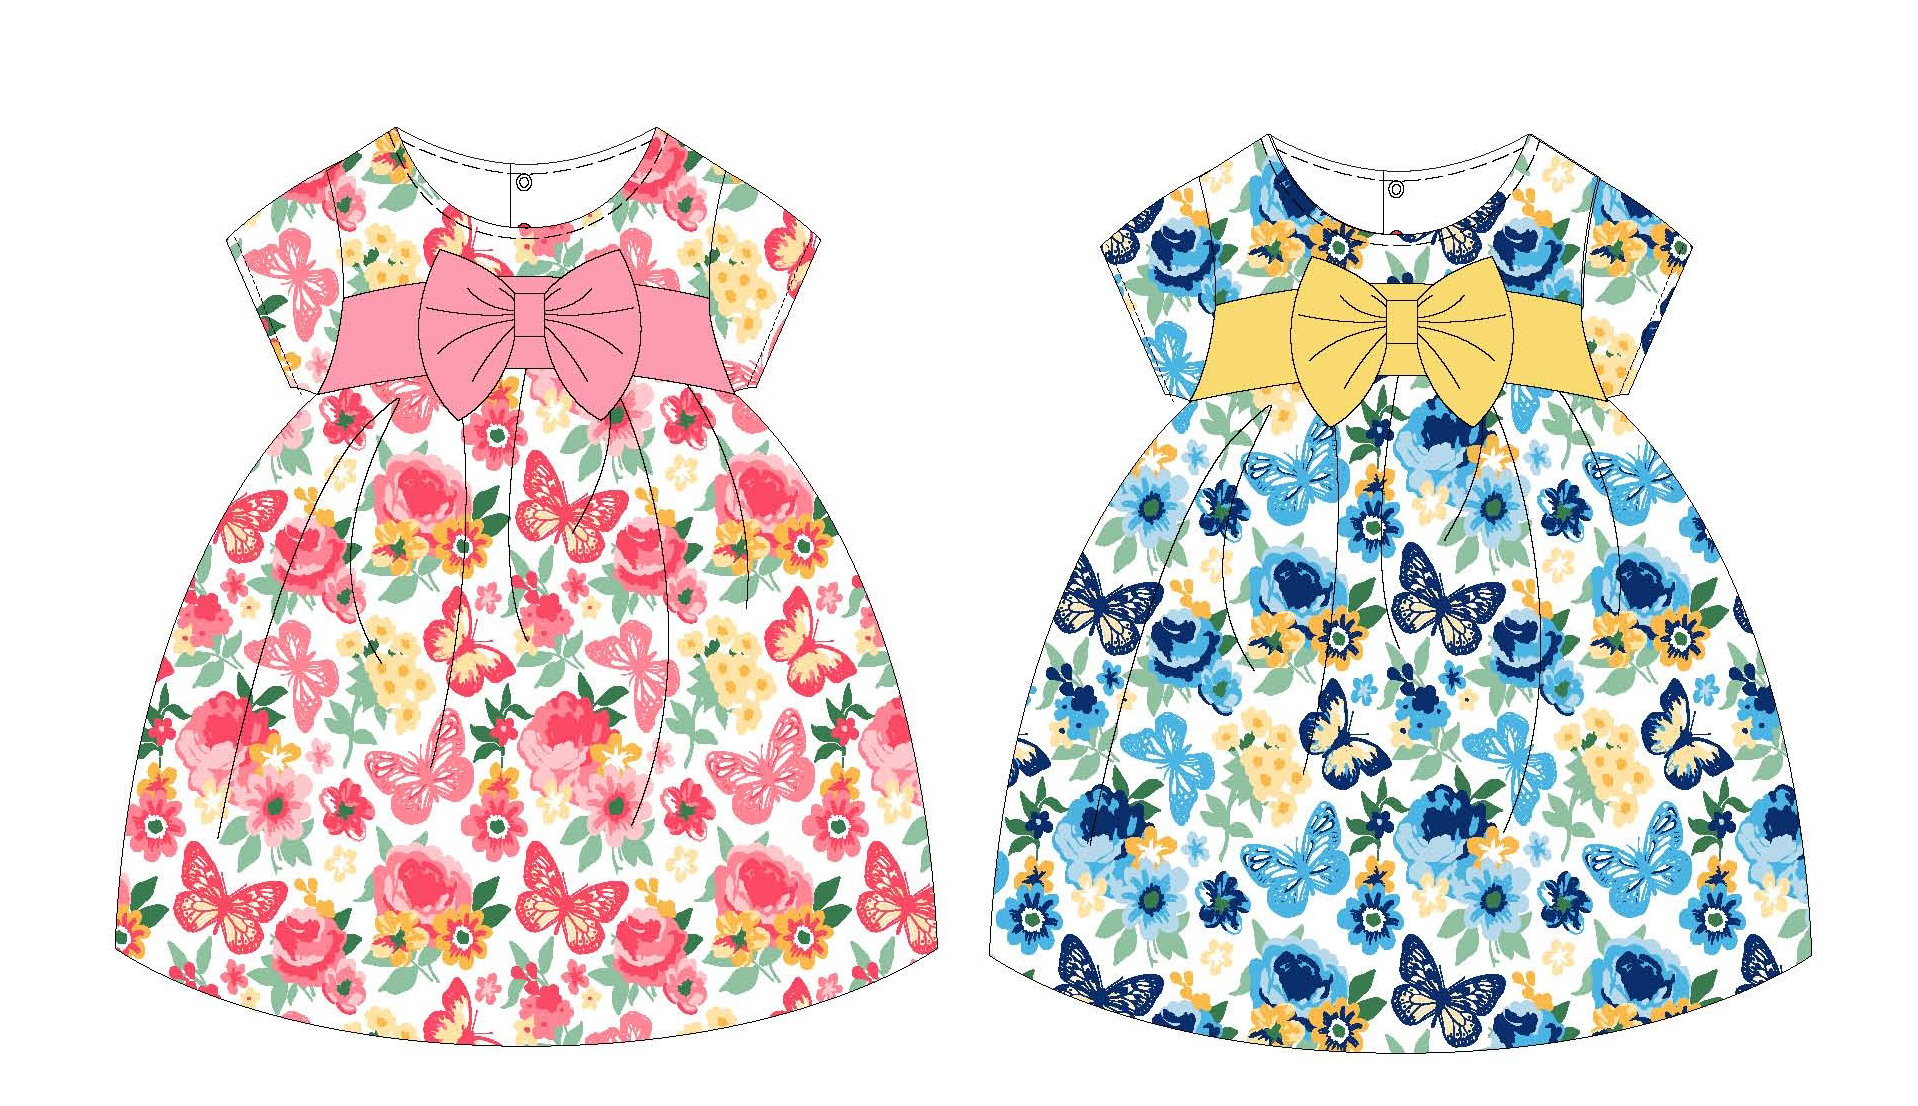 Infant Girl's Knit Printed Dresses w/ Embroidered Ribbon Bow & Butterfly Print - Sizes 12M-24M